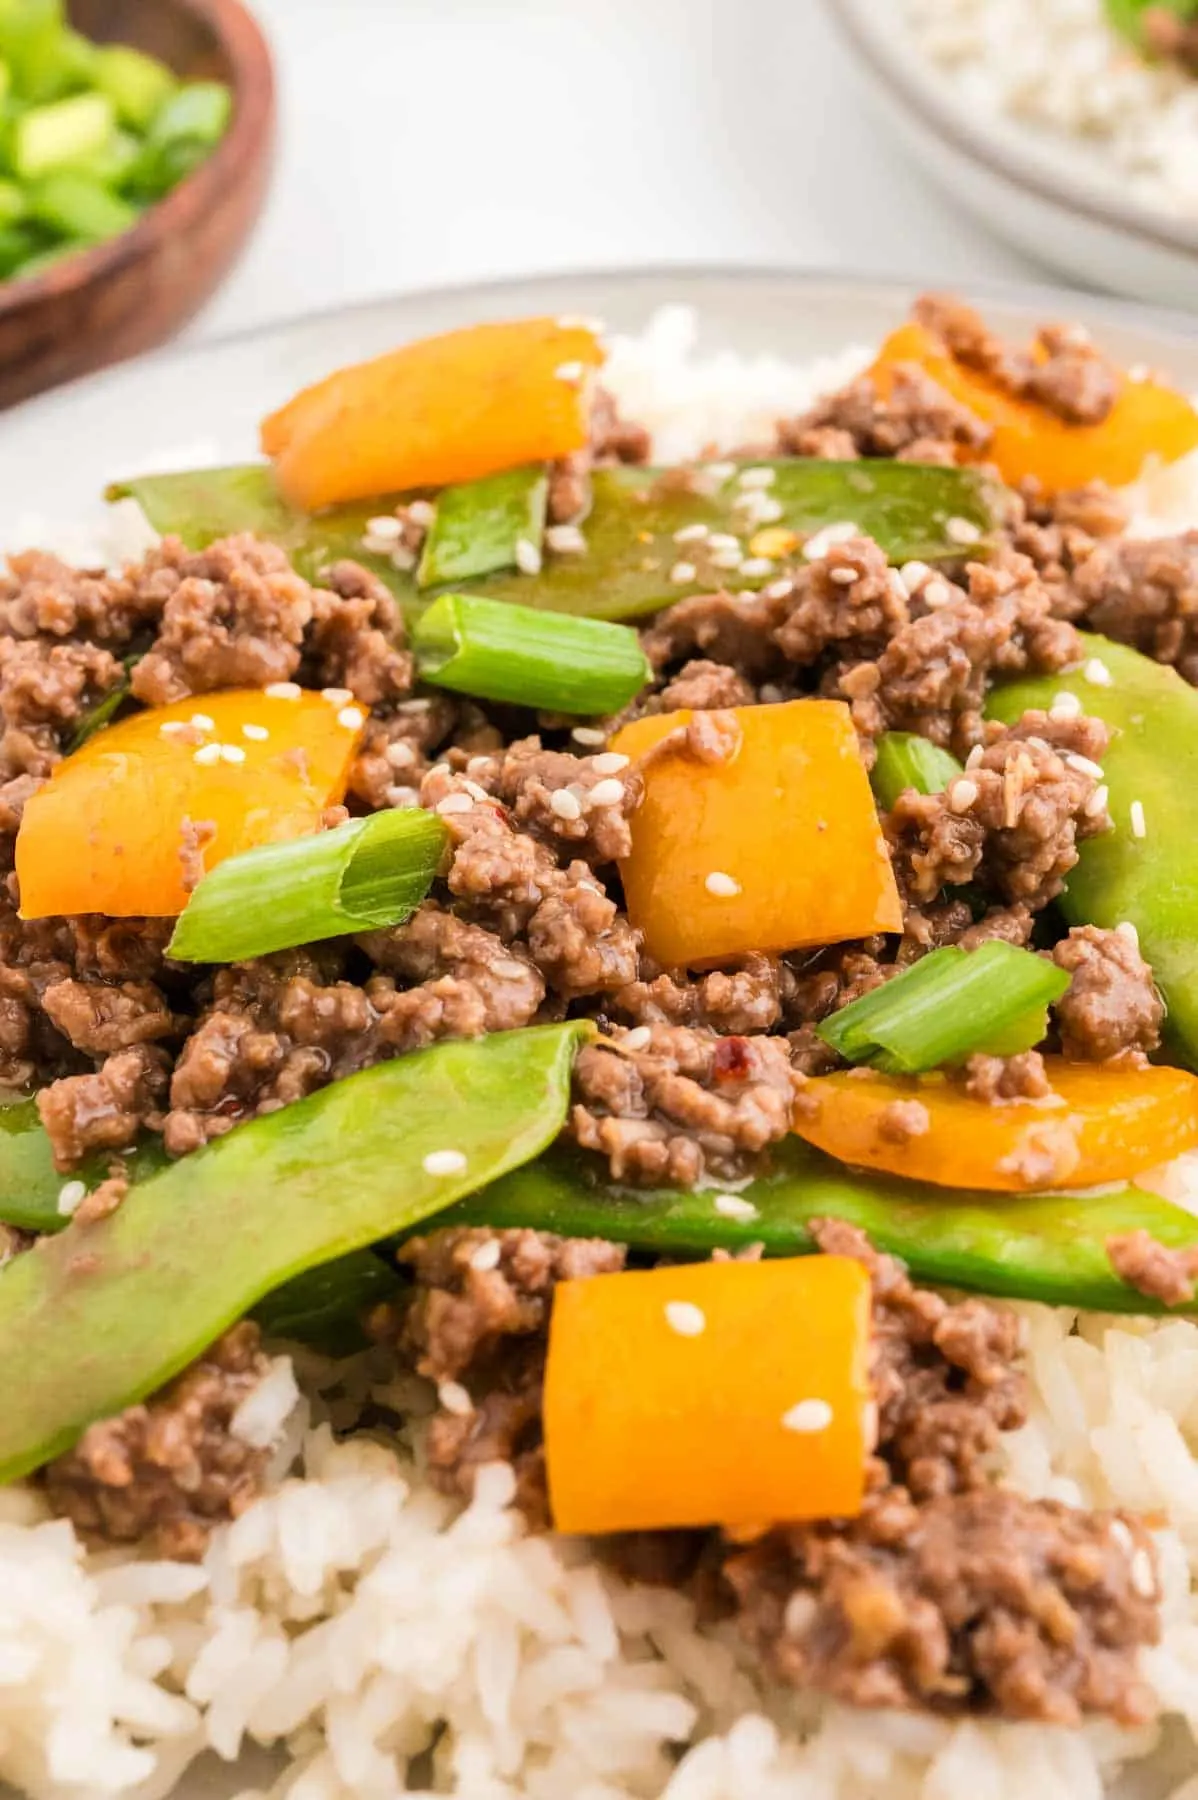 Ground Beef Stir Fry is an easy weeknight dinner recipe loaded with ground beef, snow peas, orange bell pepper, green onions and sesame seeds all cooked in a garlic, ginger, honey and soy sauce mixture.